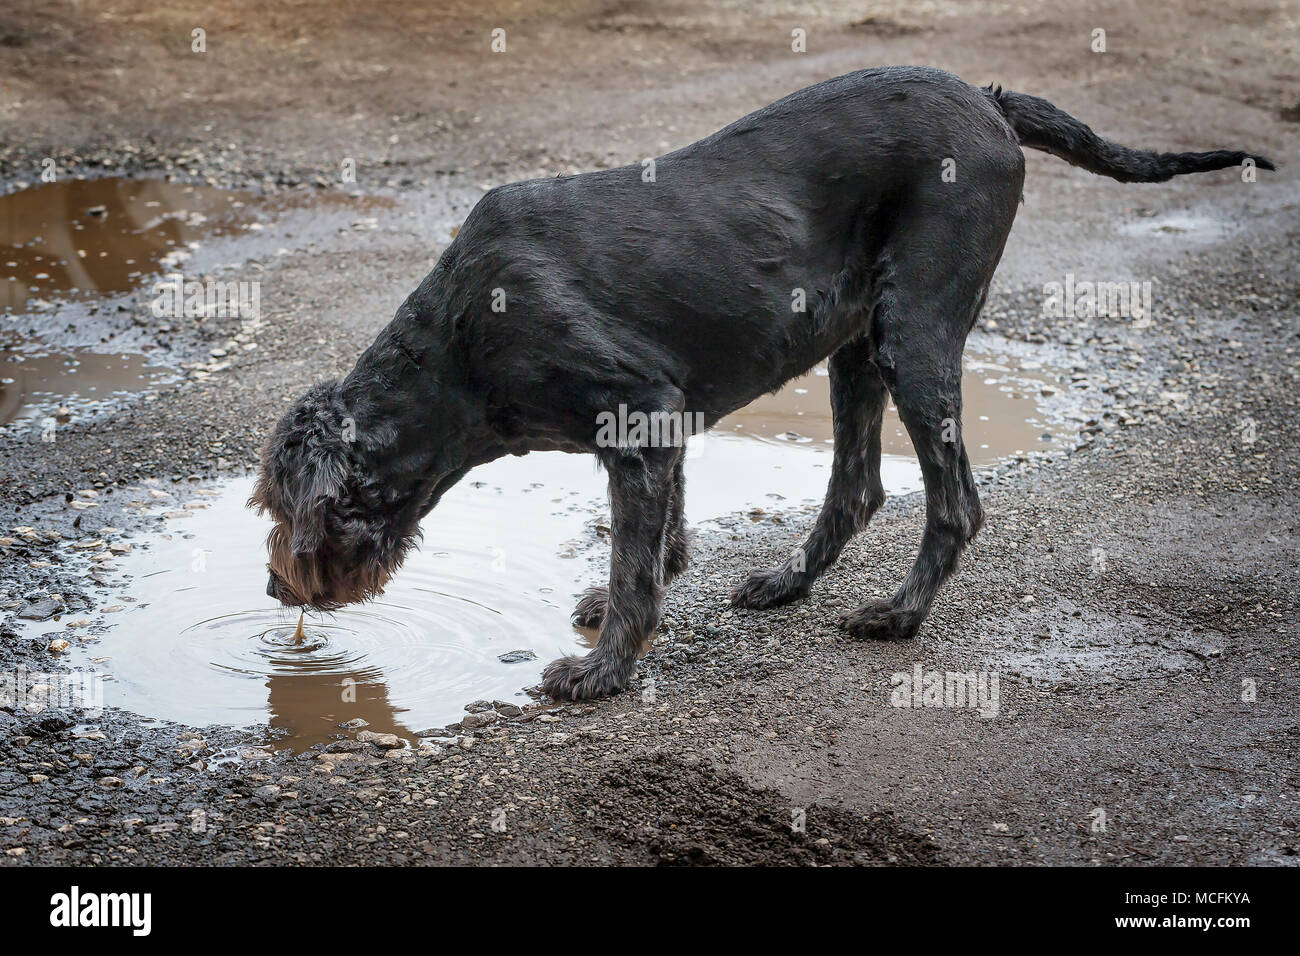 Black Labradoodle dog that has recently had its fur trimmed drinks from a muddy puddle in a car park on 16 April 2018 Stock Photo